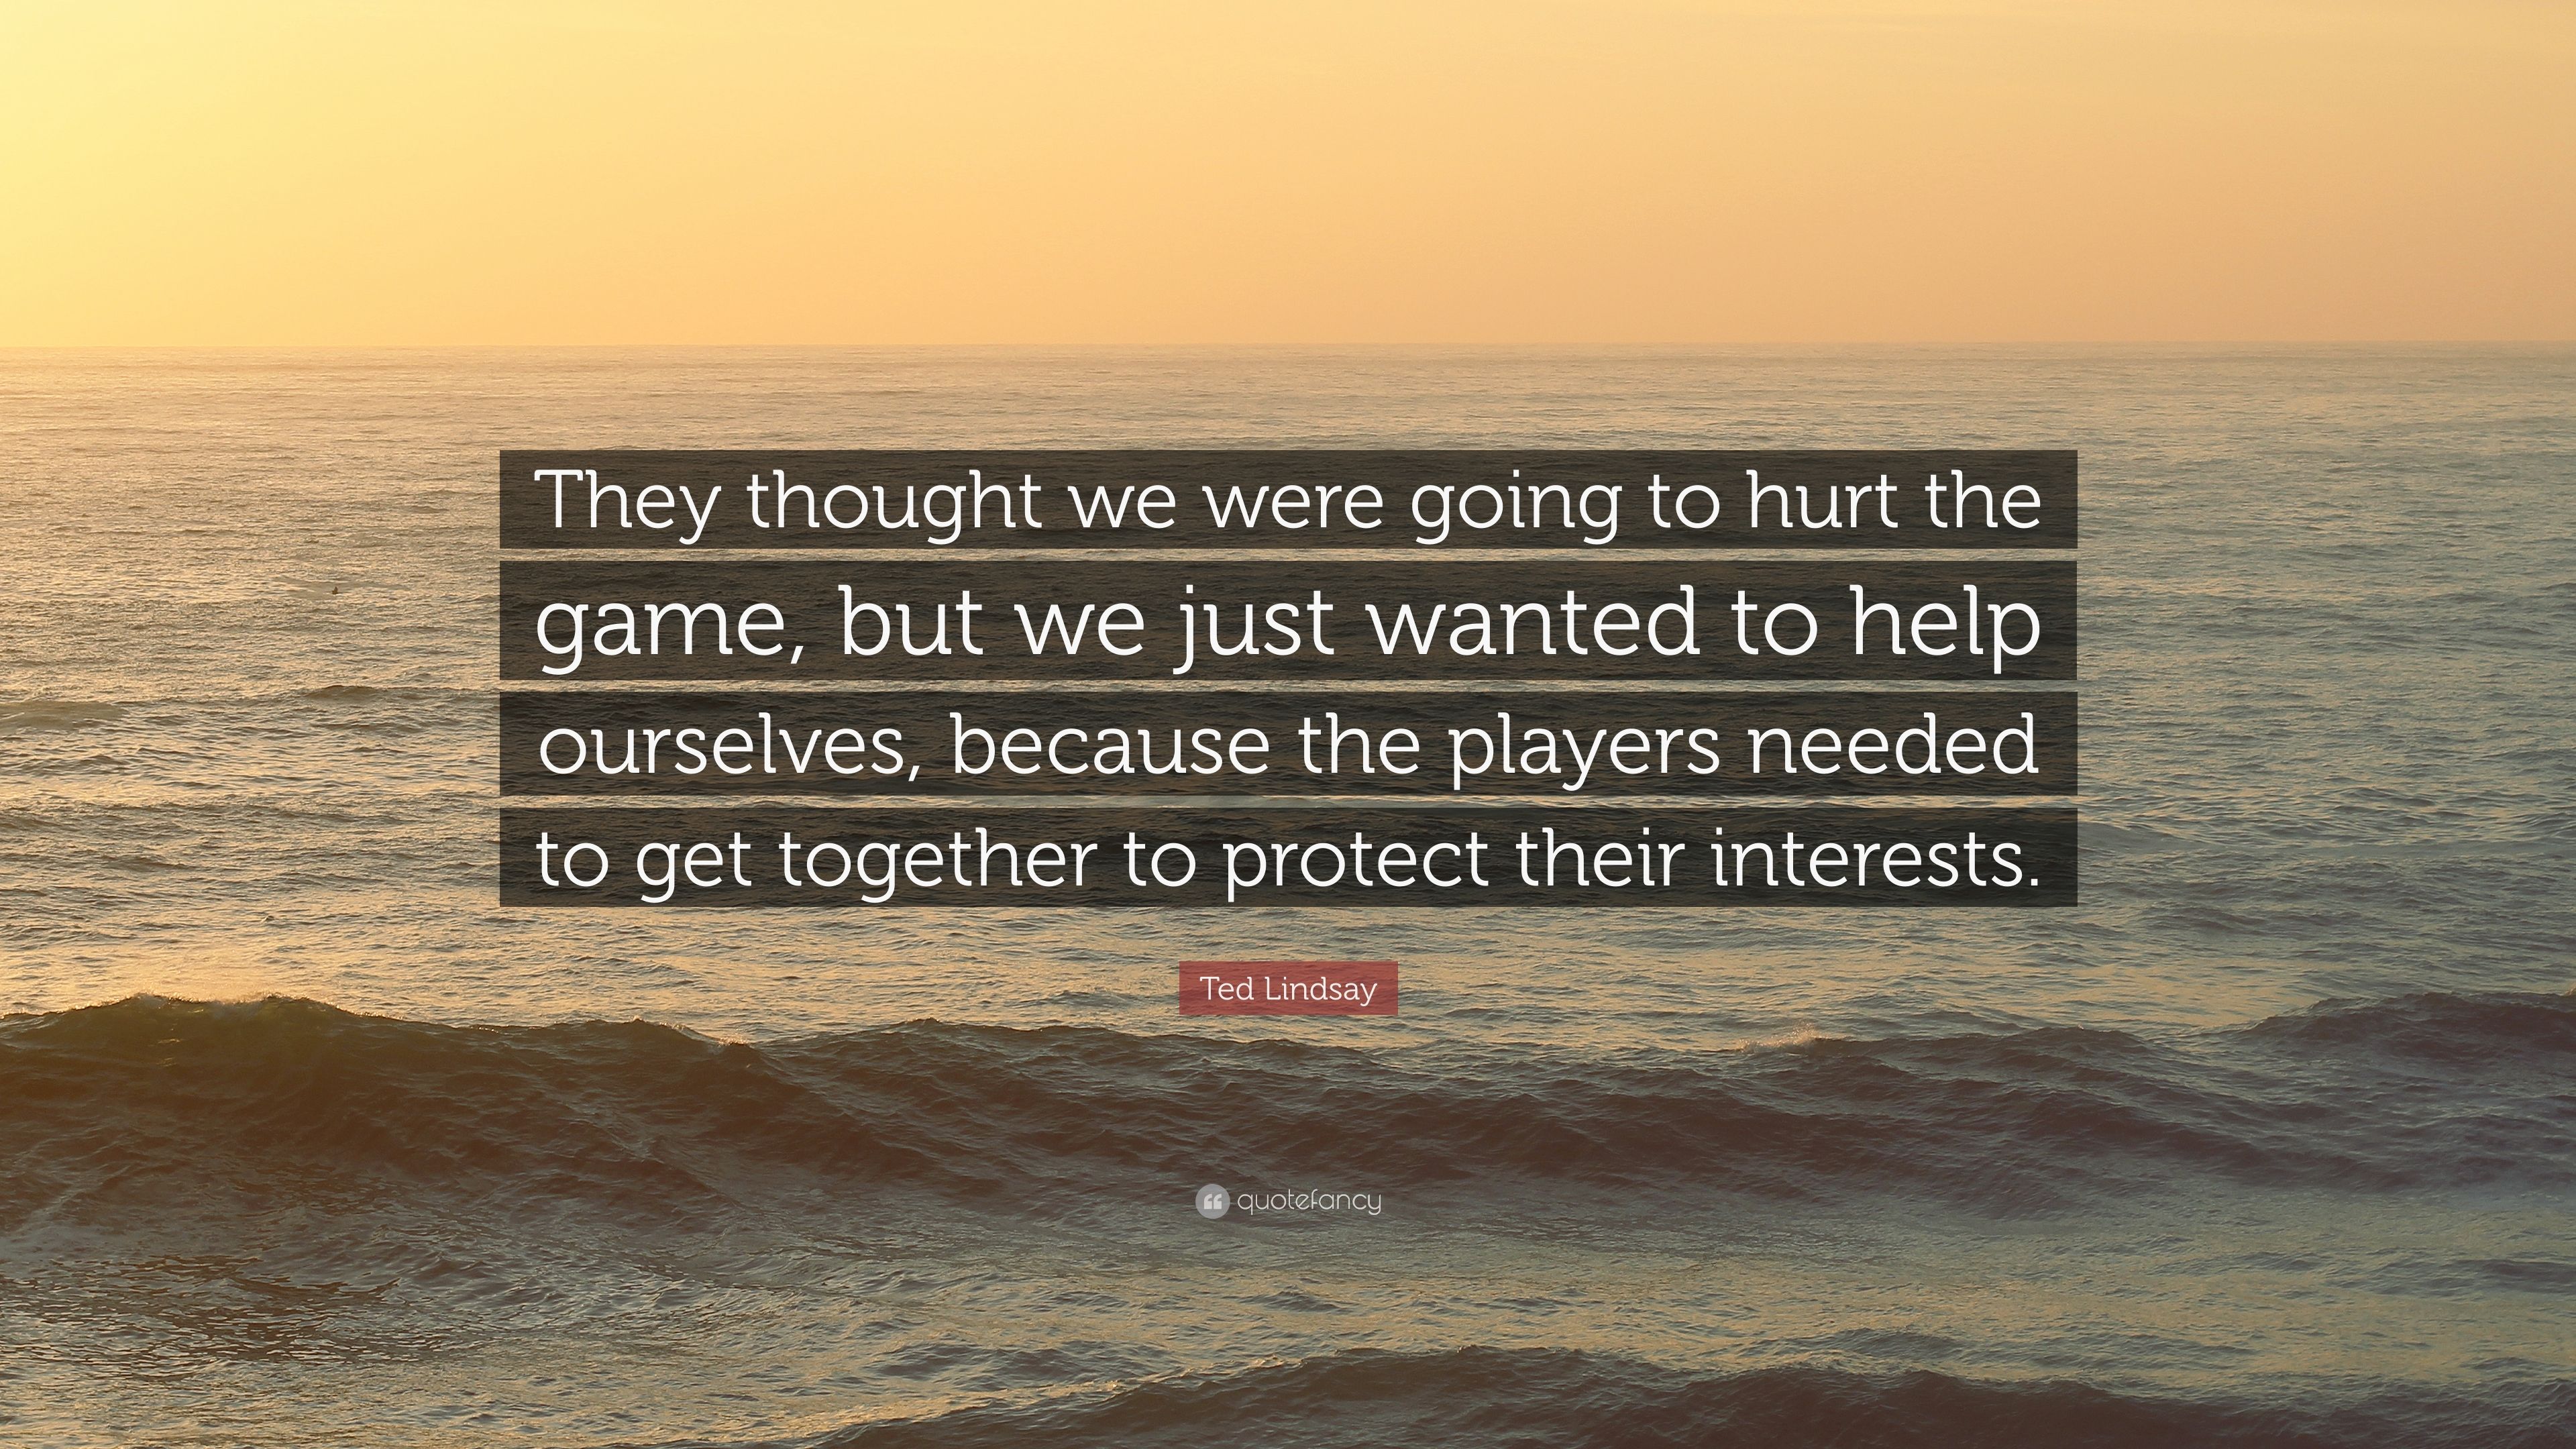 Ted Lindsay Quote: “They thought we were going to hurt the game, but